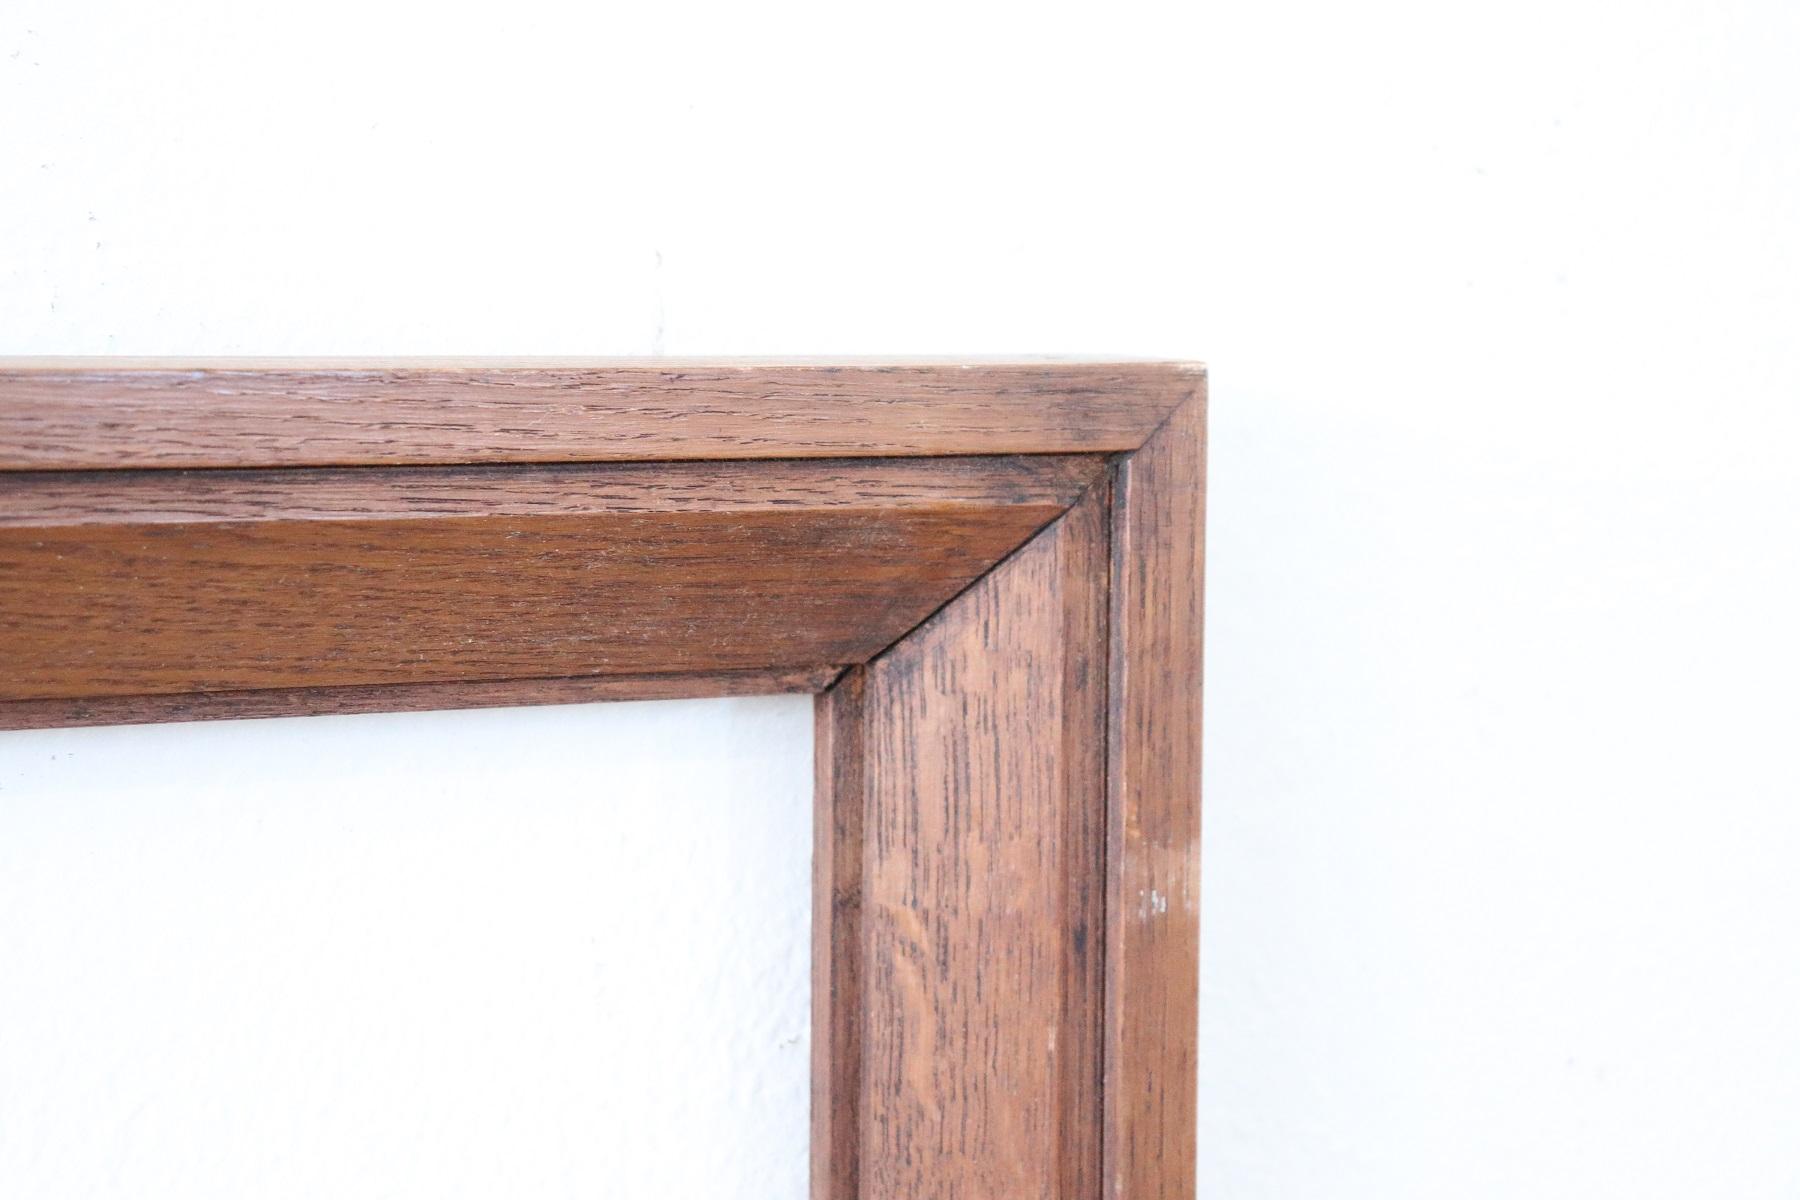 External measures cm 55 x cm 64
Inside cm 55 x cm 46
Refined wood frame ,circa 1930s. Made of solid oakwood. Conditions used look good all photos, no structural damage. You can use this frame according to your imagination with a mirror, a